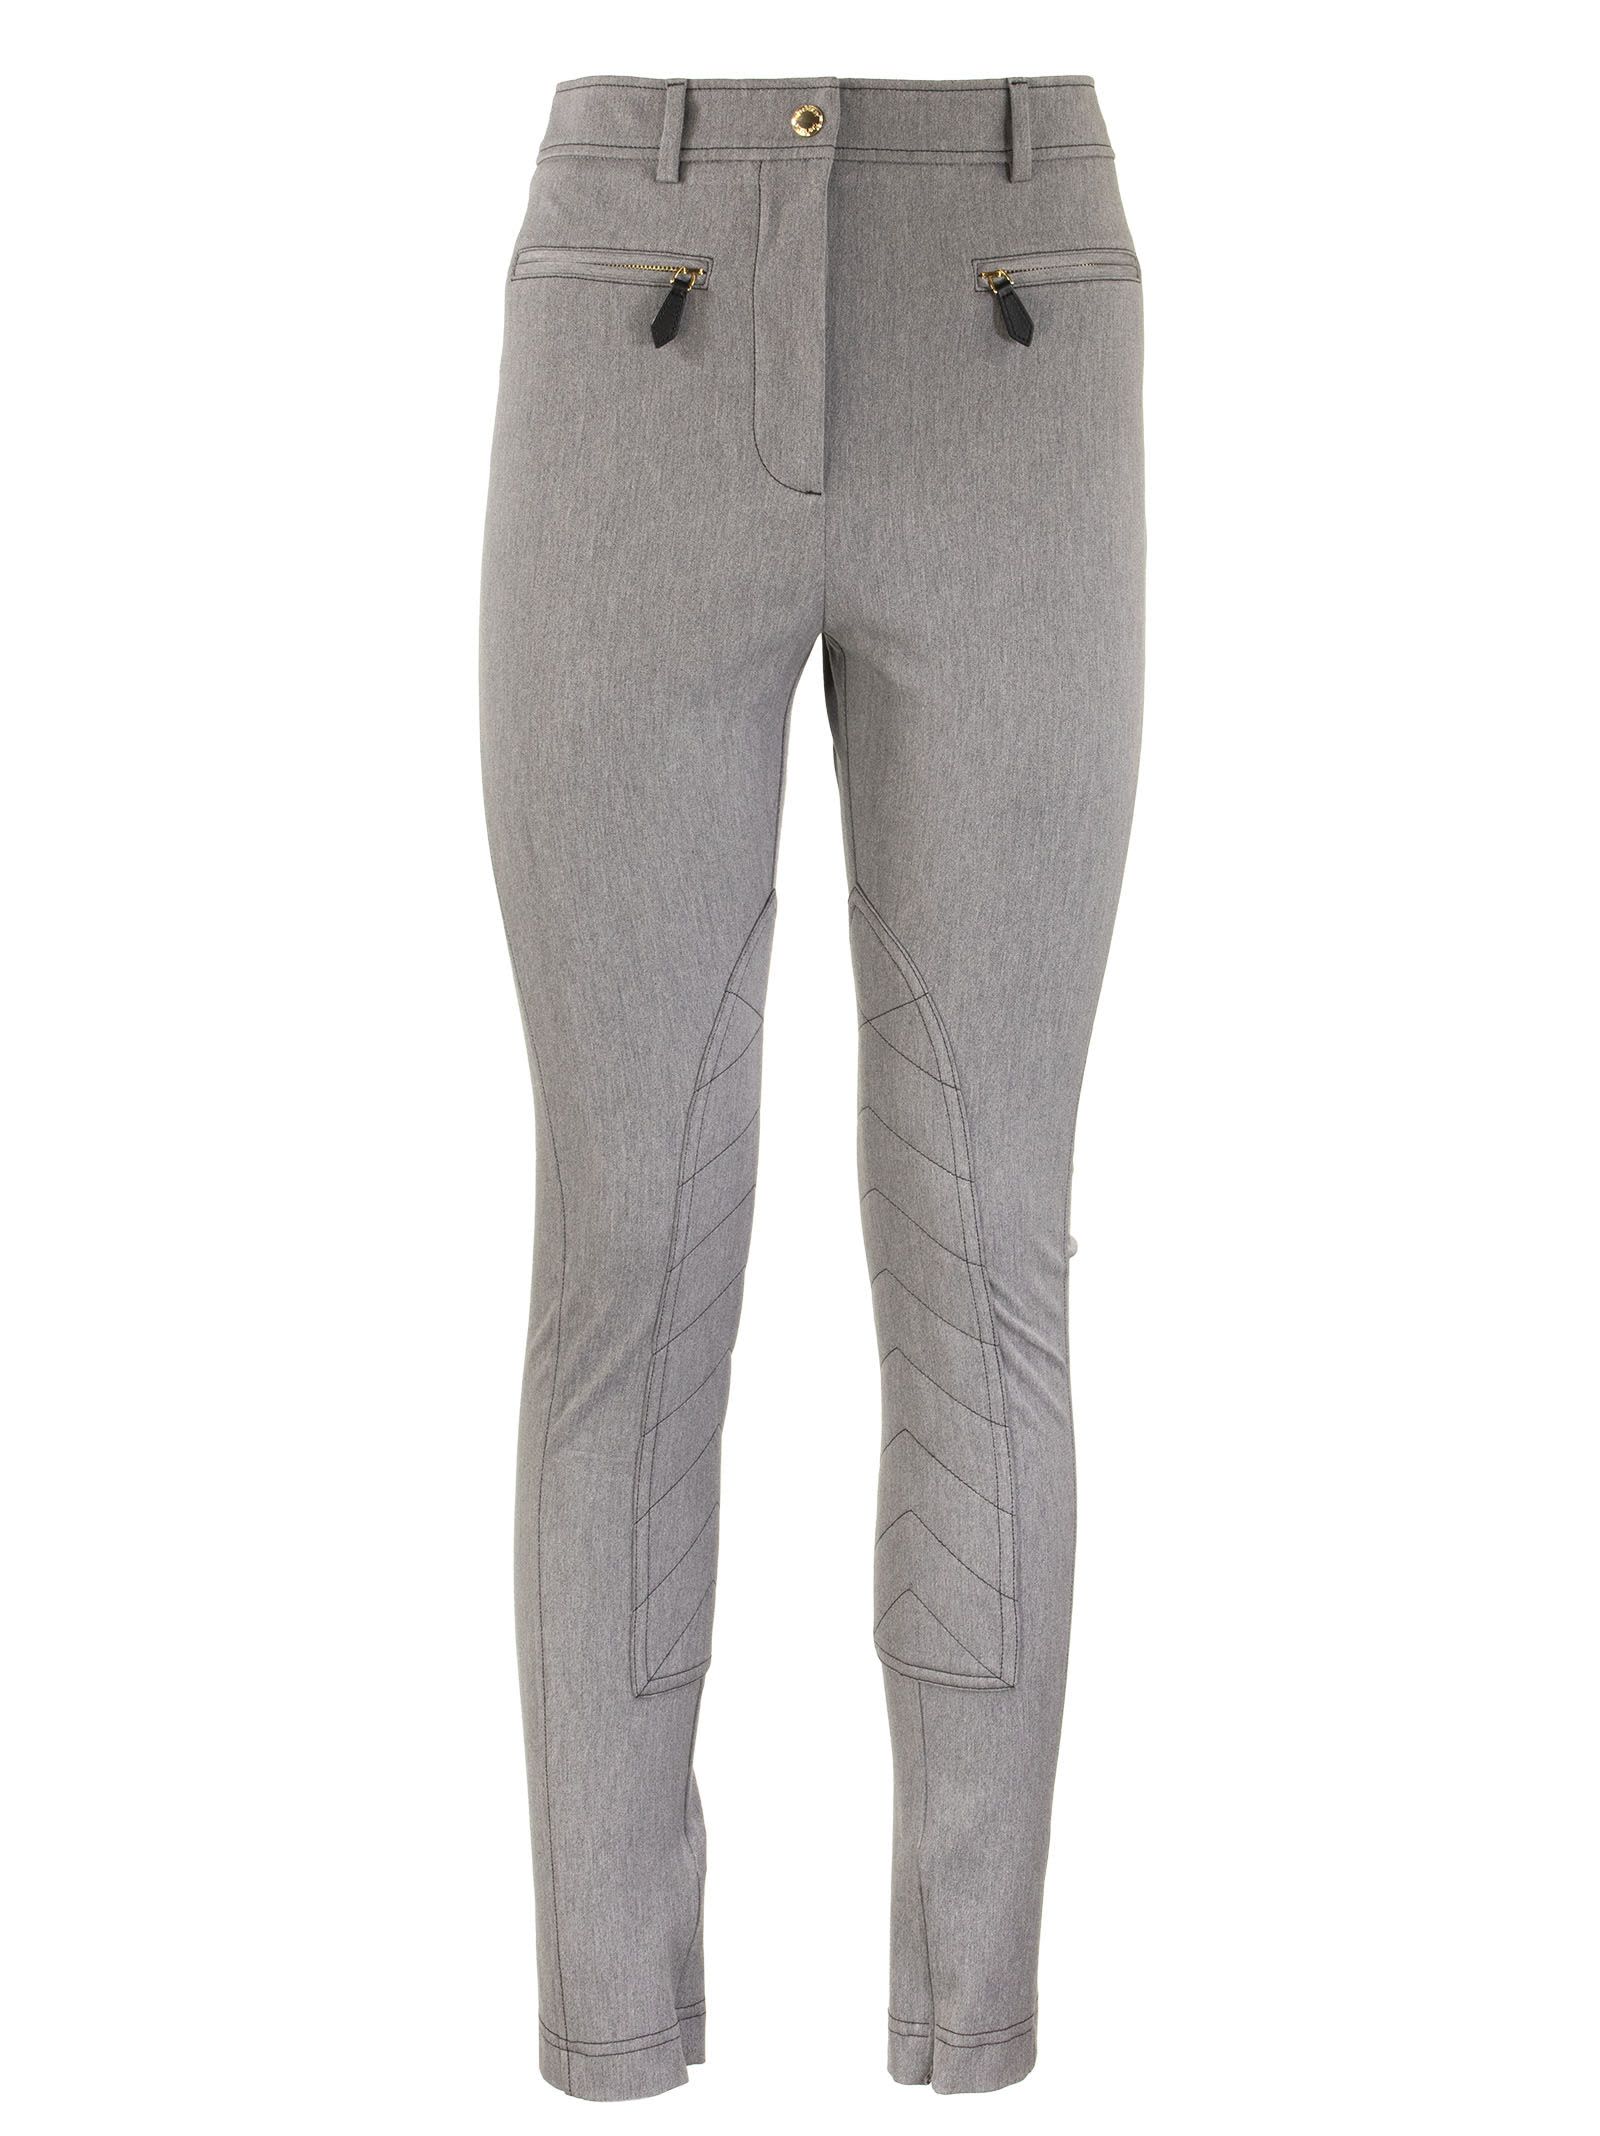 Burberry Jodie - Zip Detail Stretch Cotton Blend Trousers